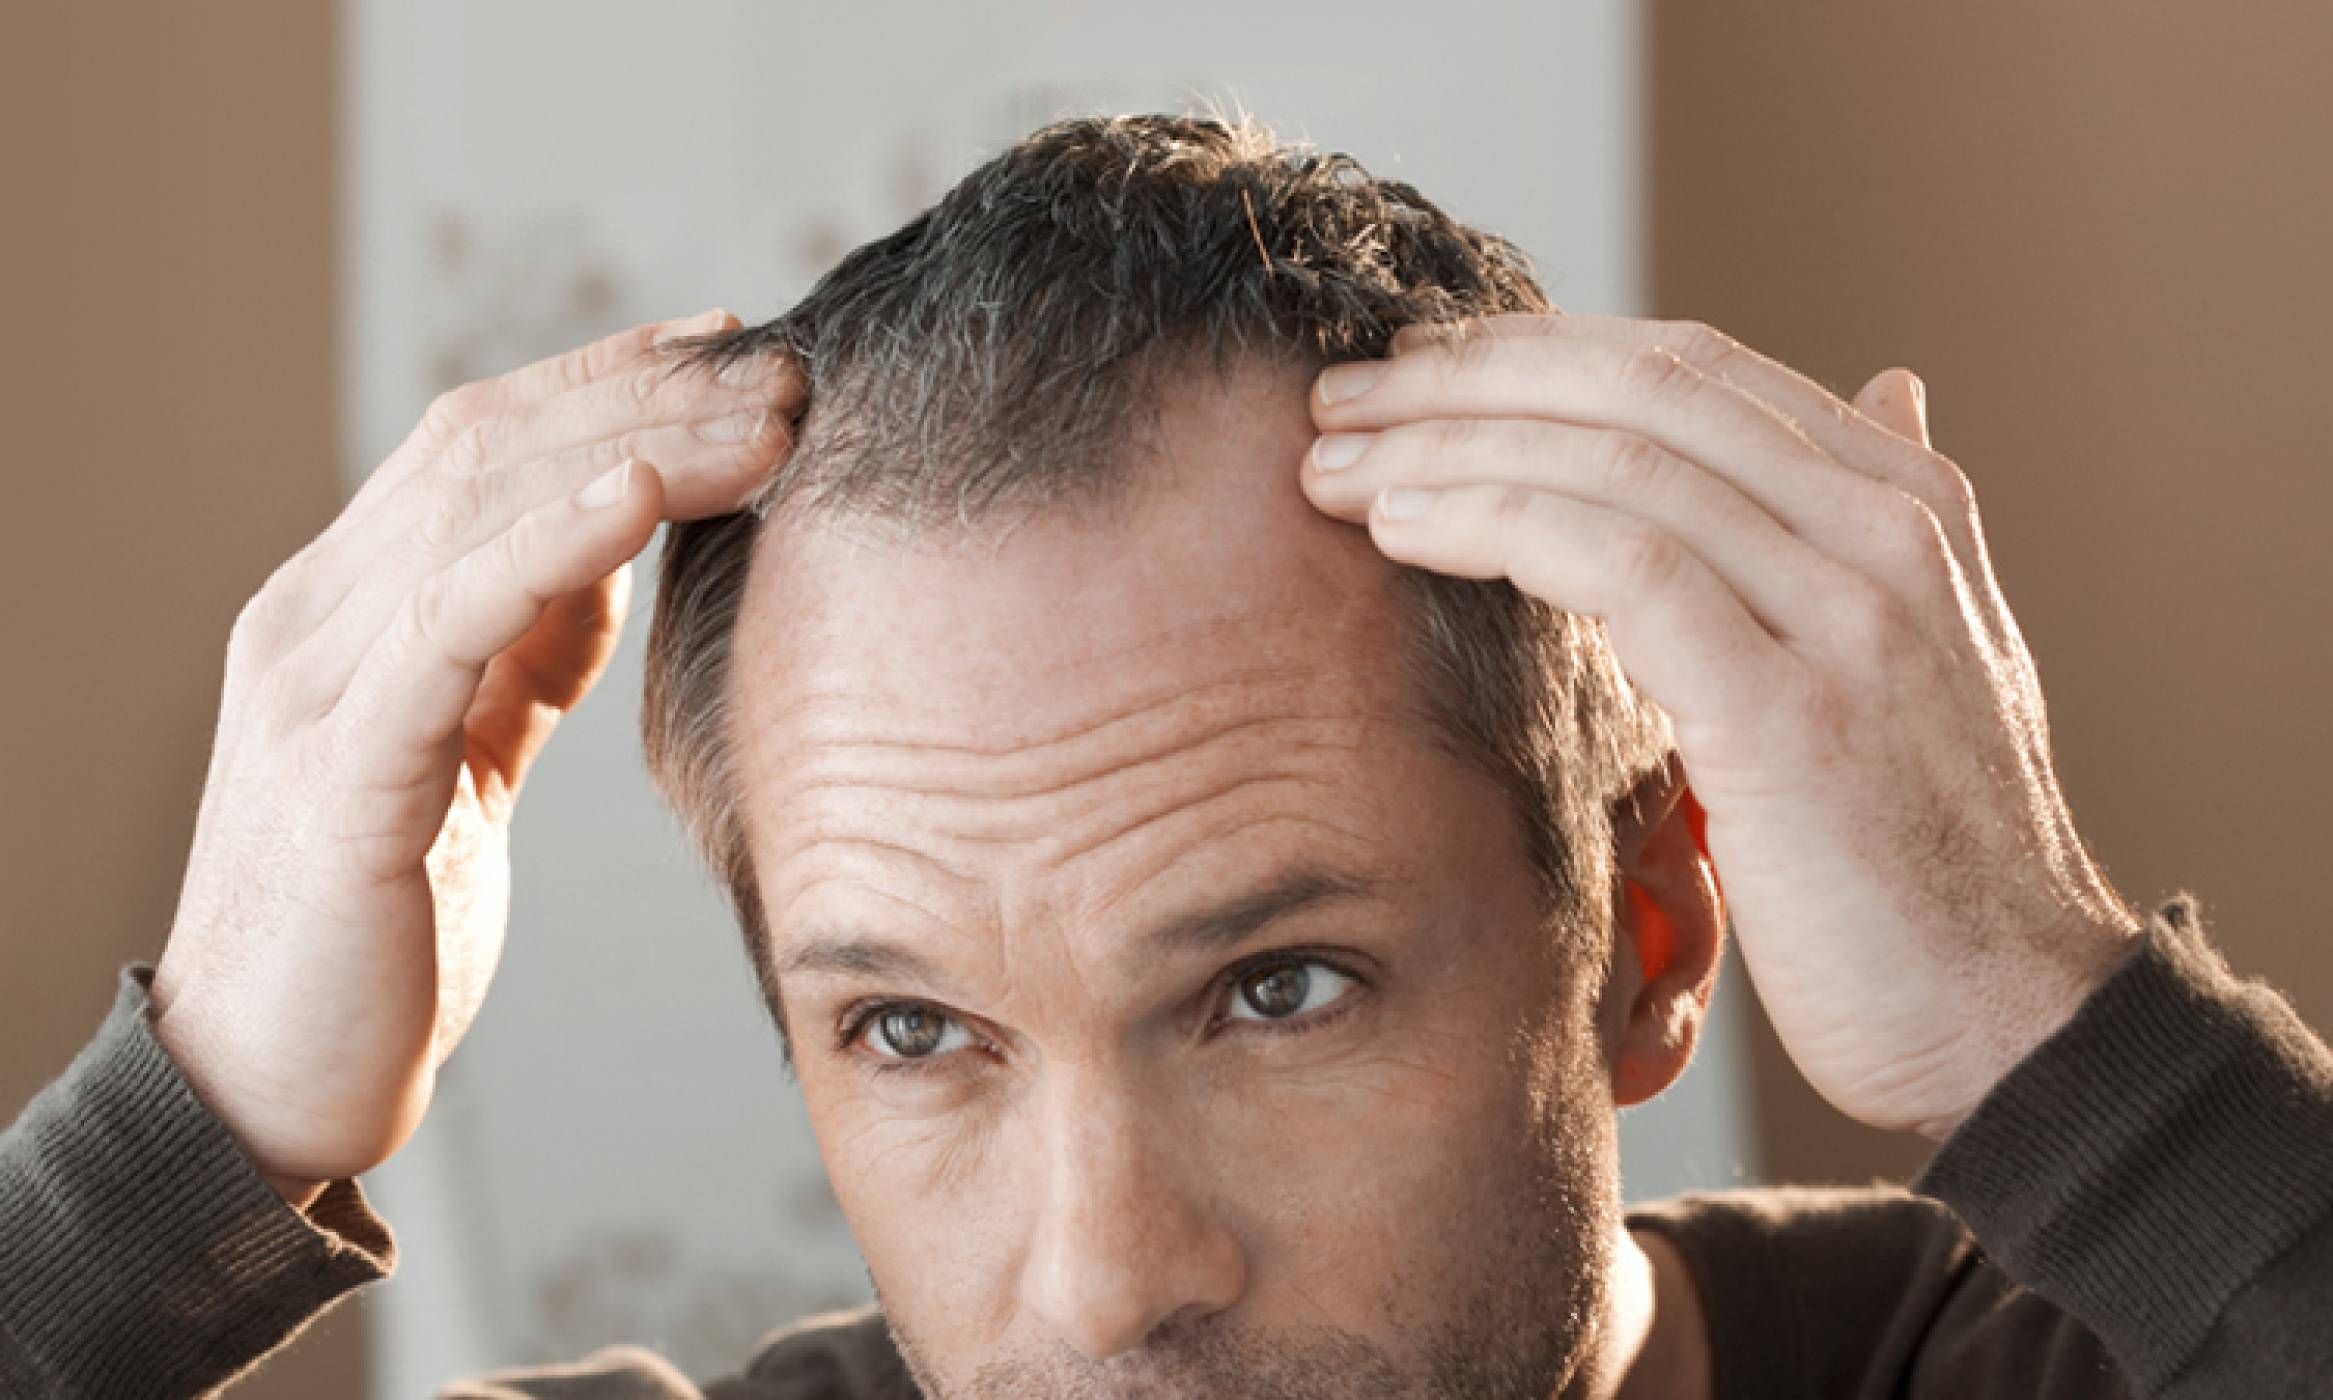 A man in his forties points at his receding hairline with both hands, highlighting the roots of his hair.